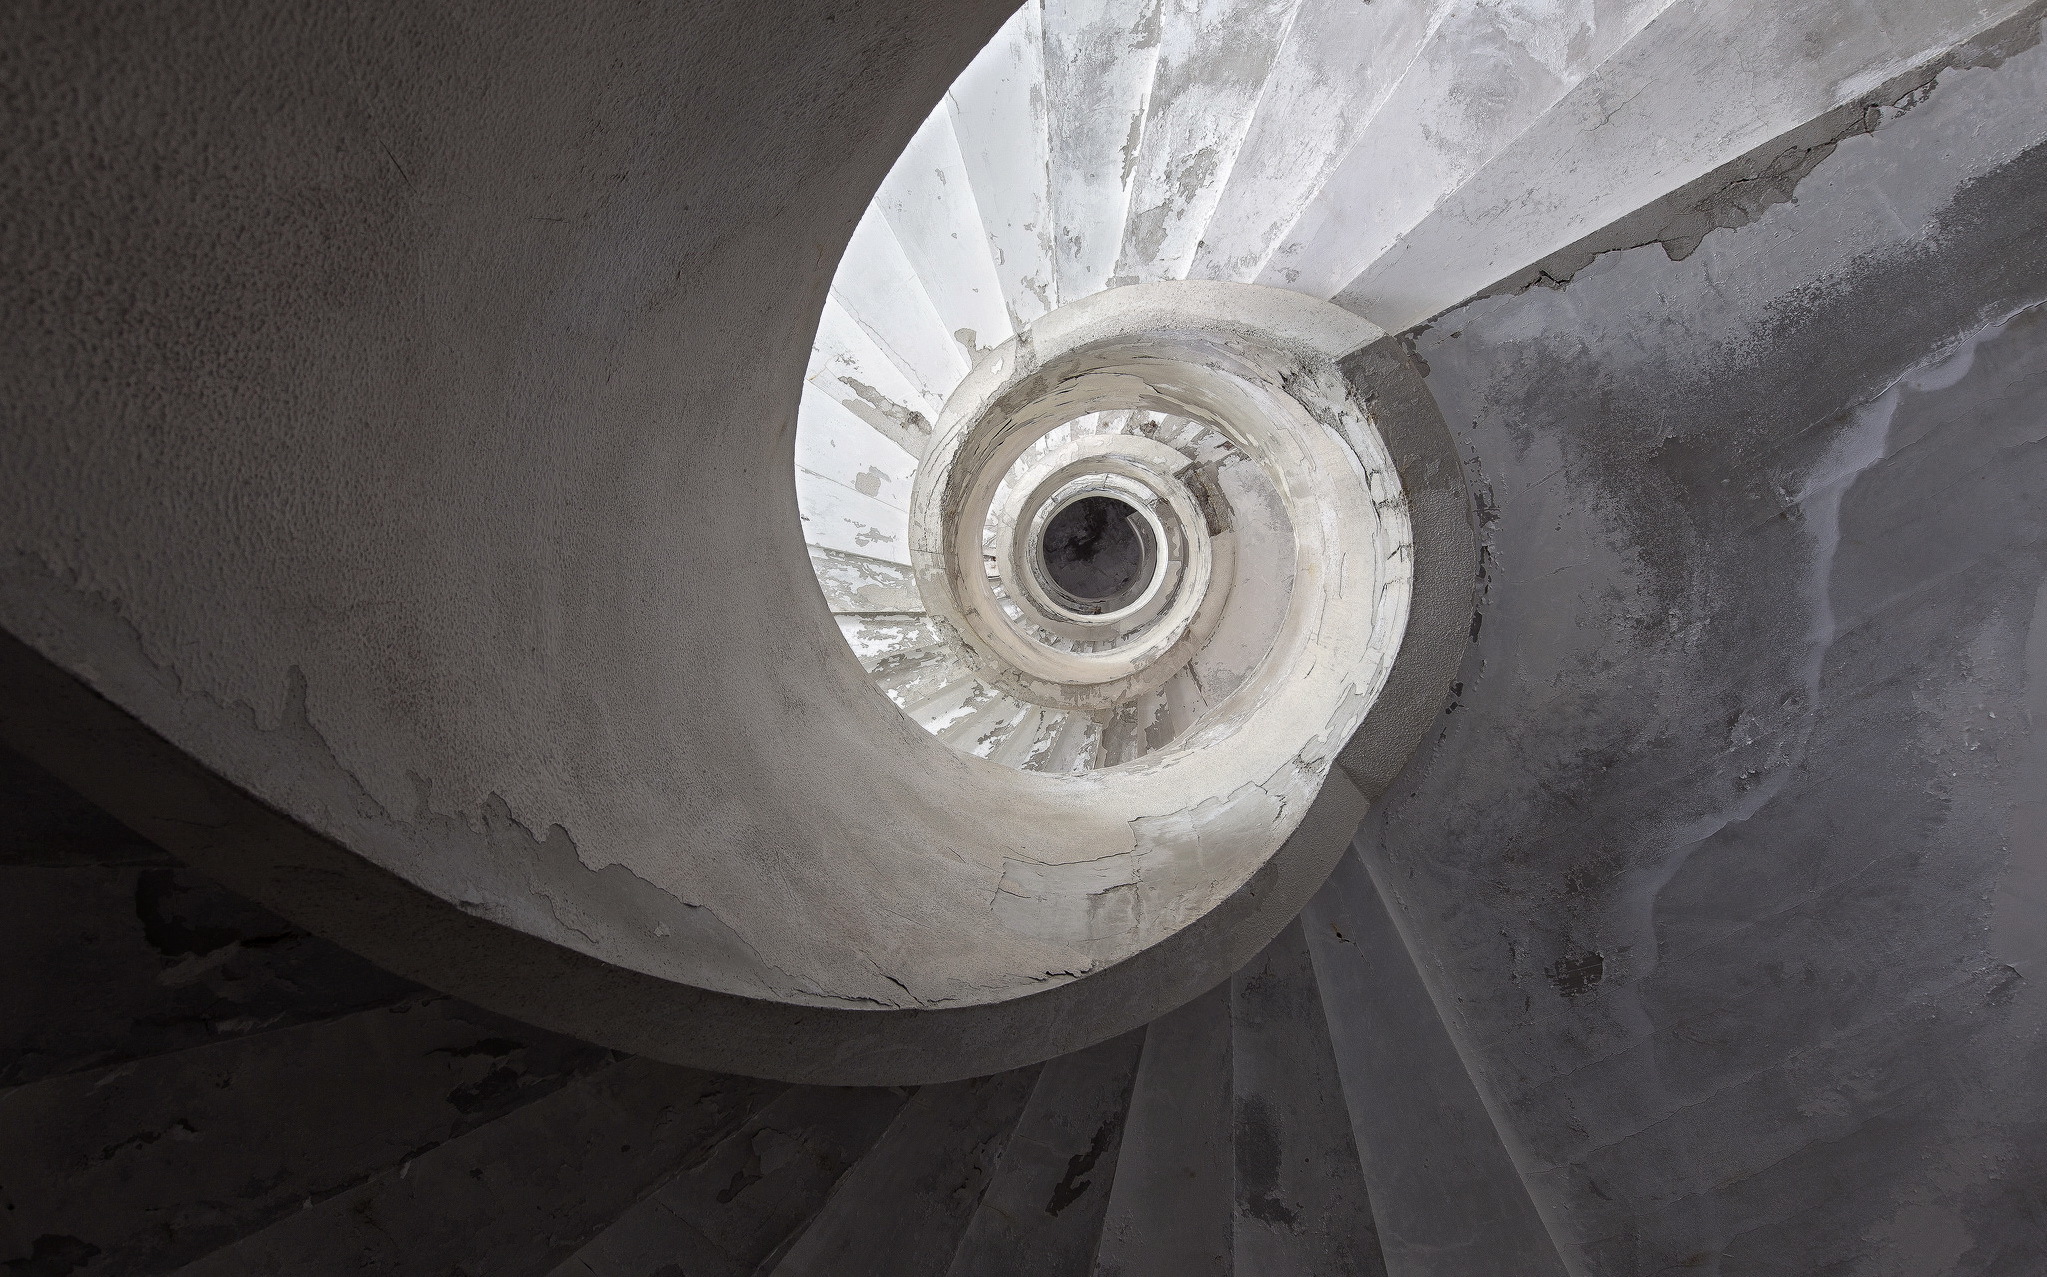 Stairs Spiral Staircase 2047x1277